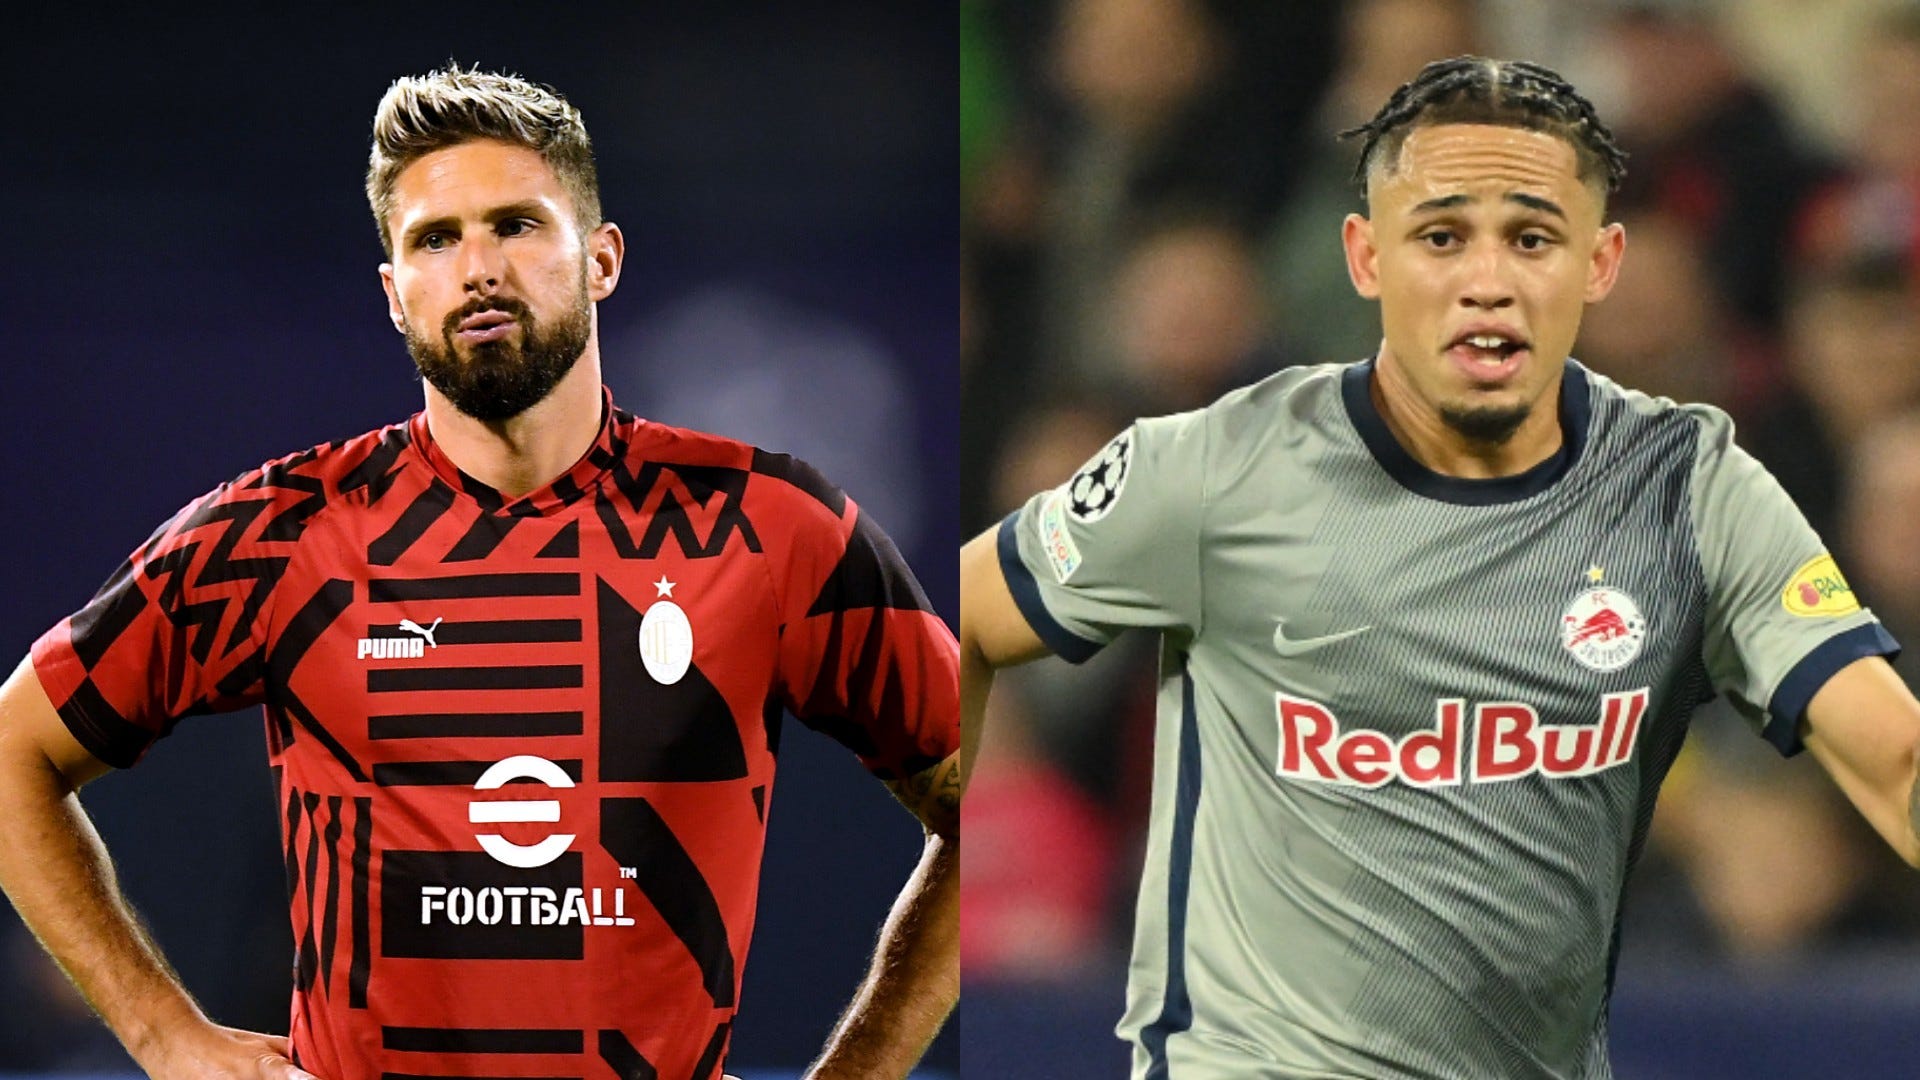 AC Milan vs Red Bull Salzburg Live stream, TV channel, kick-off time and where to watch Goal Uganda